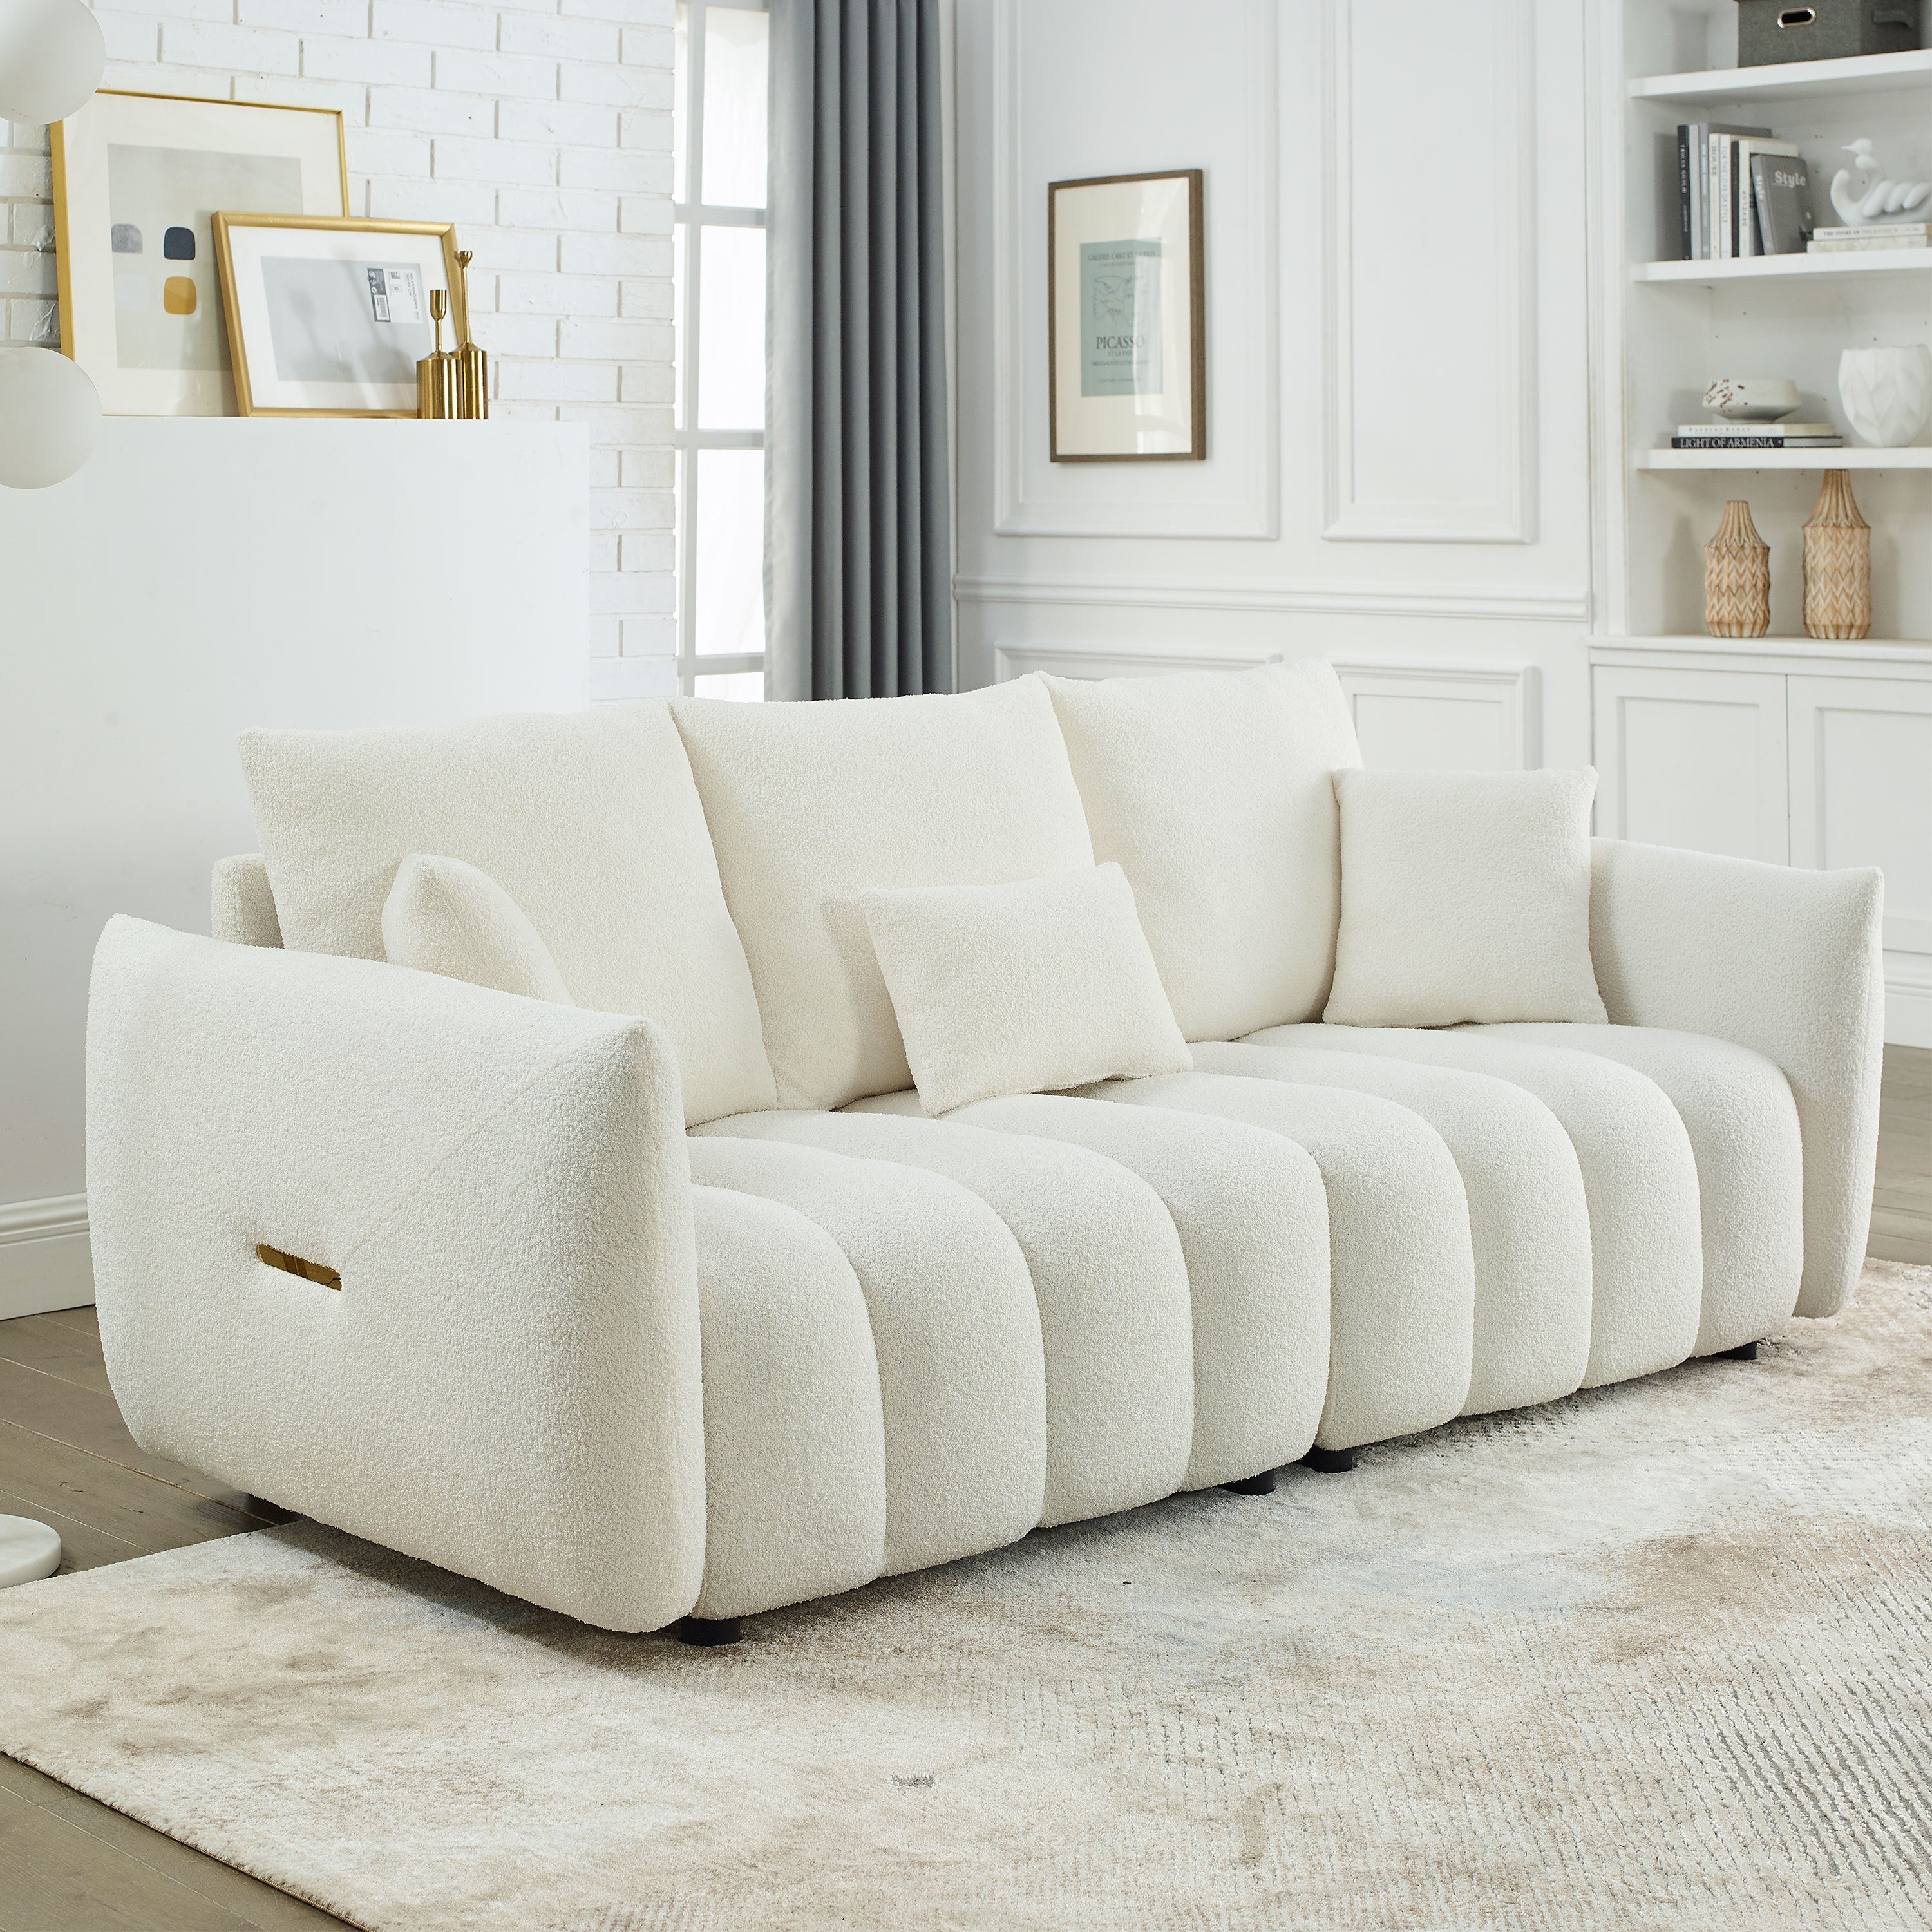 🆓🚛 82" Premium Teddy Velvet Sofa With 3 Back Pillows and 3 Back Cushions Solid Wood Frame 3-Seater Sofa, Beige